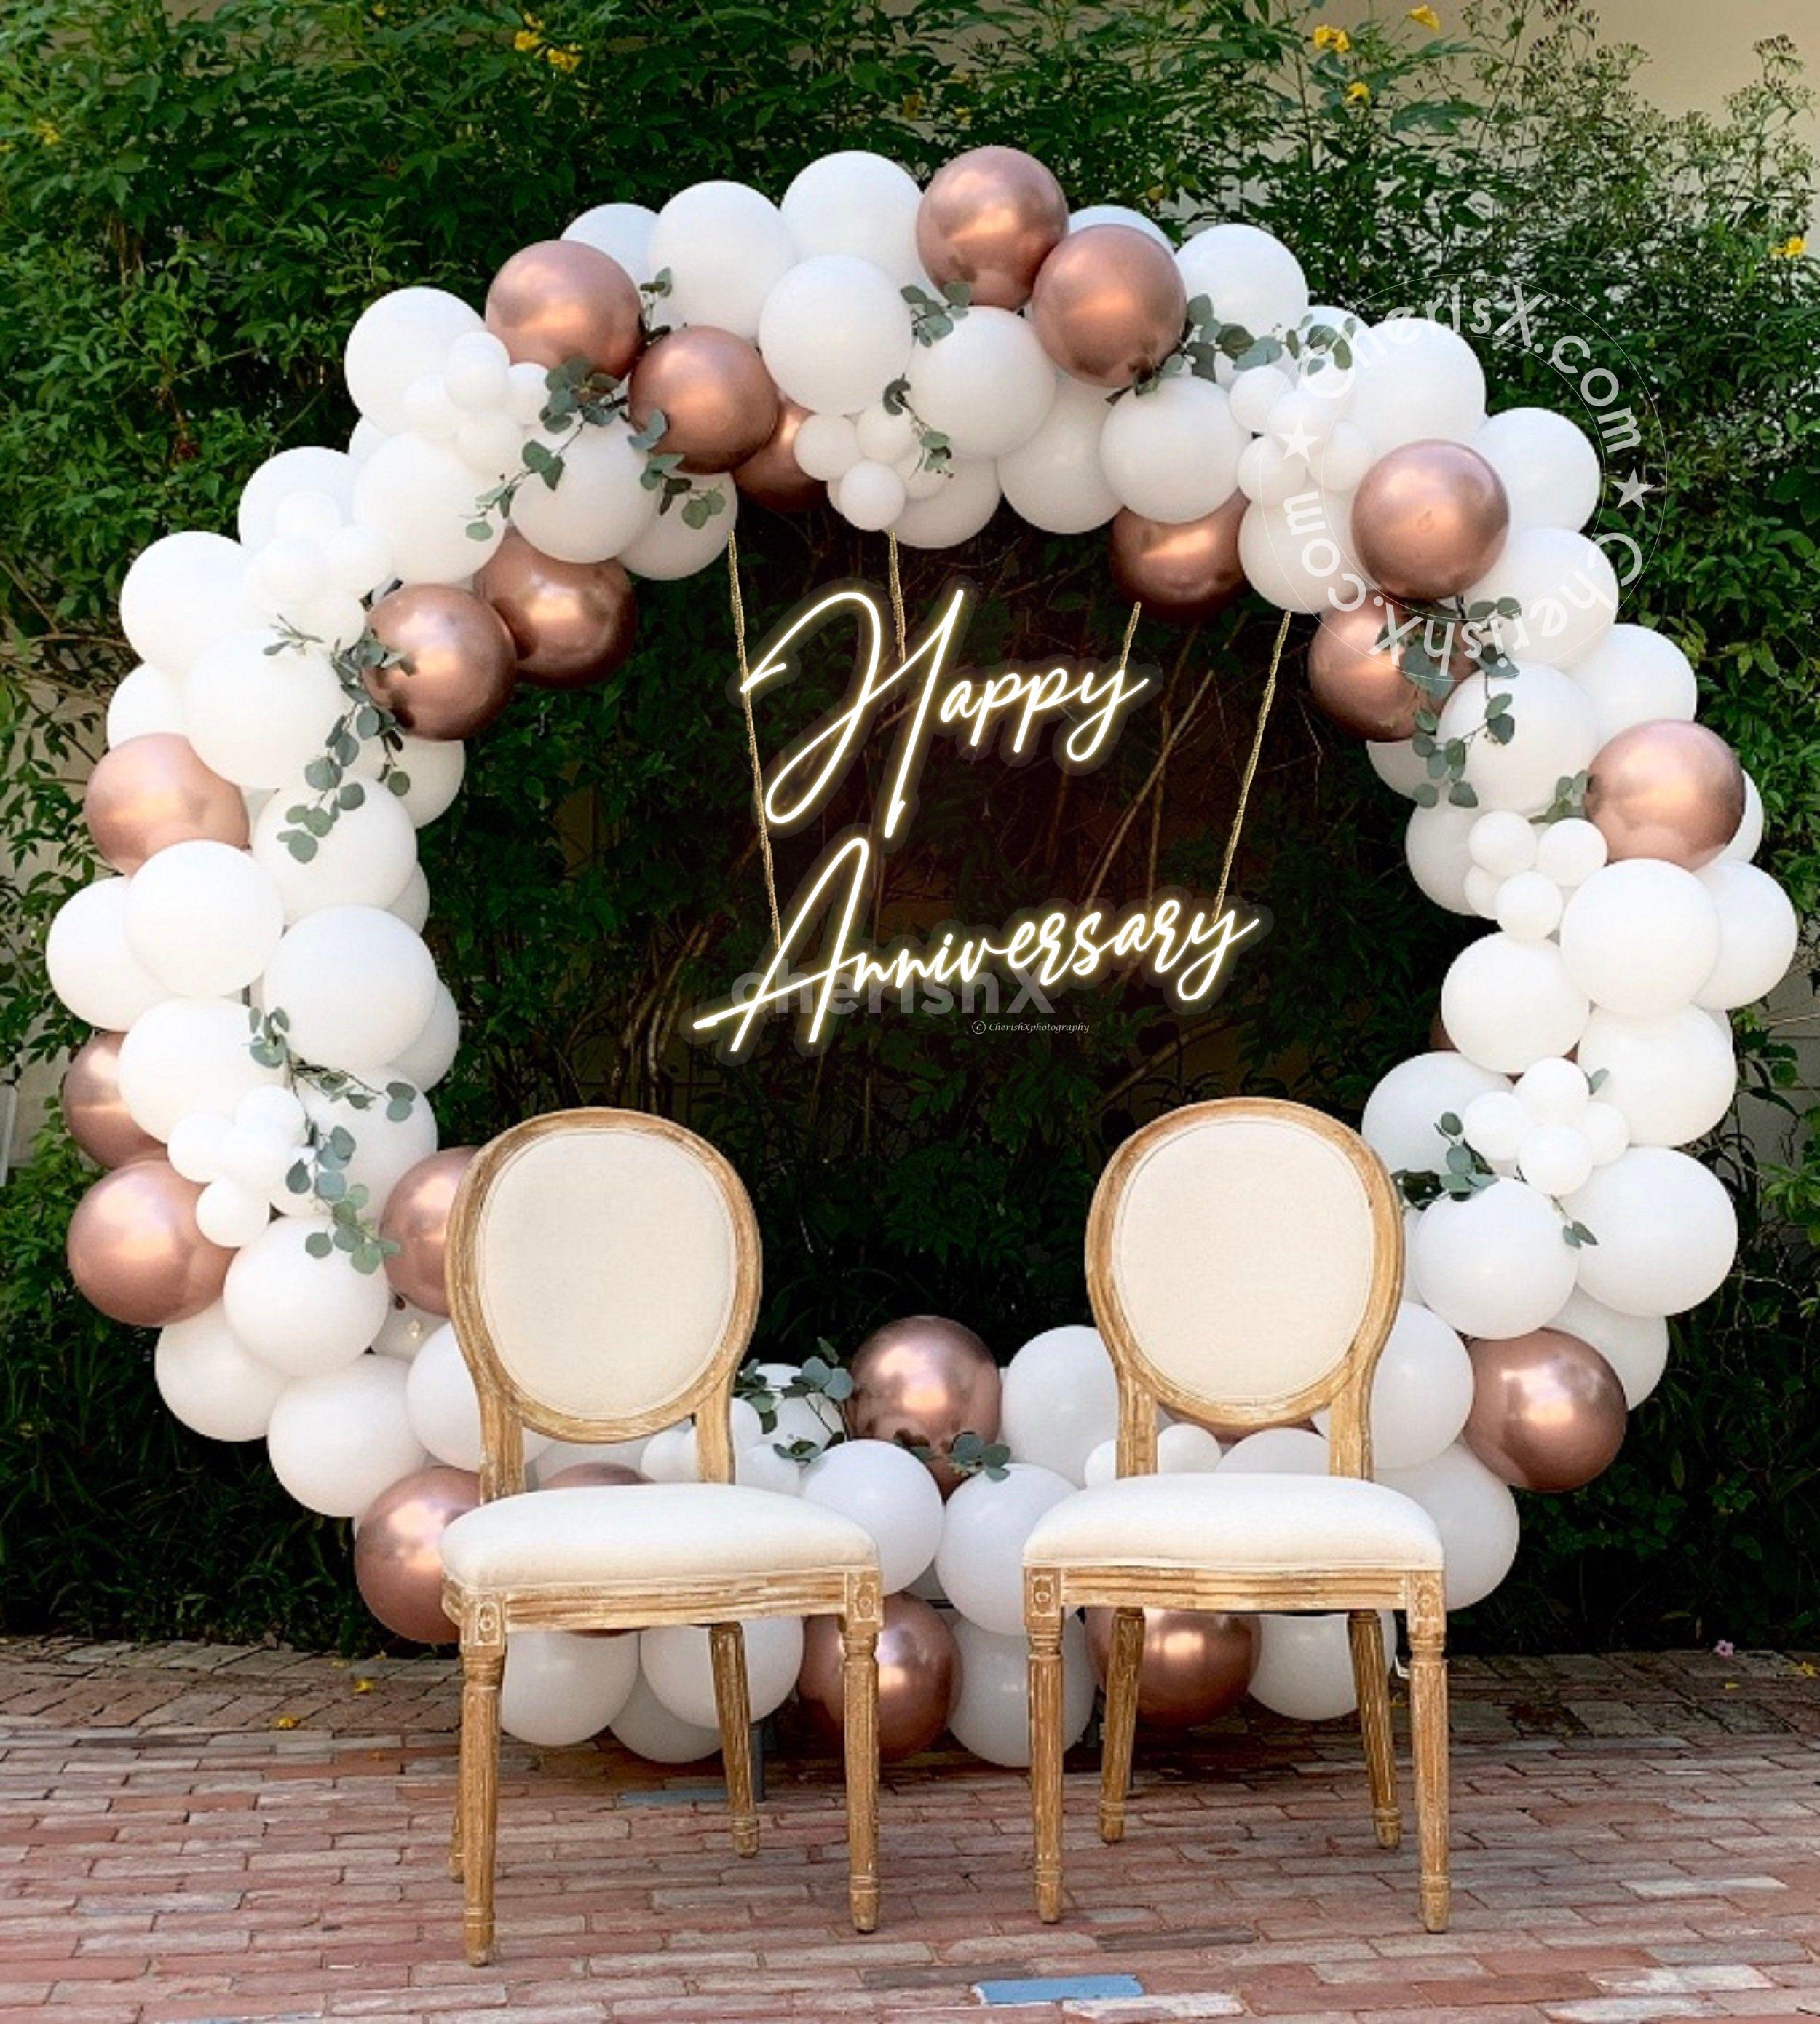 Terrace Decoration With All Lights And Balloons Enjoy Your Happiness With Us